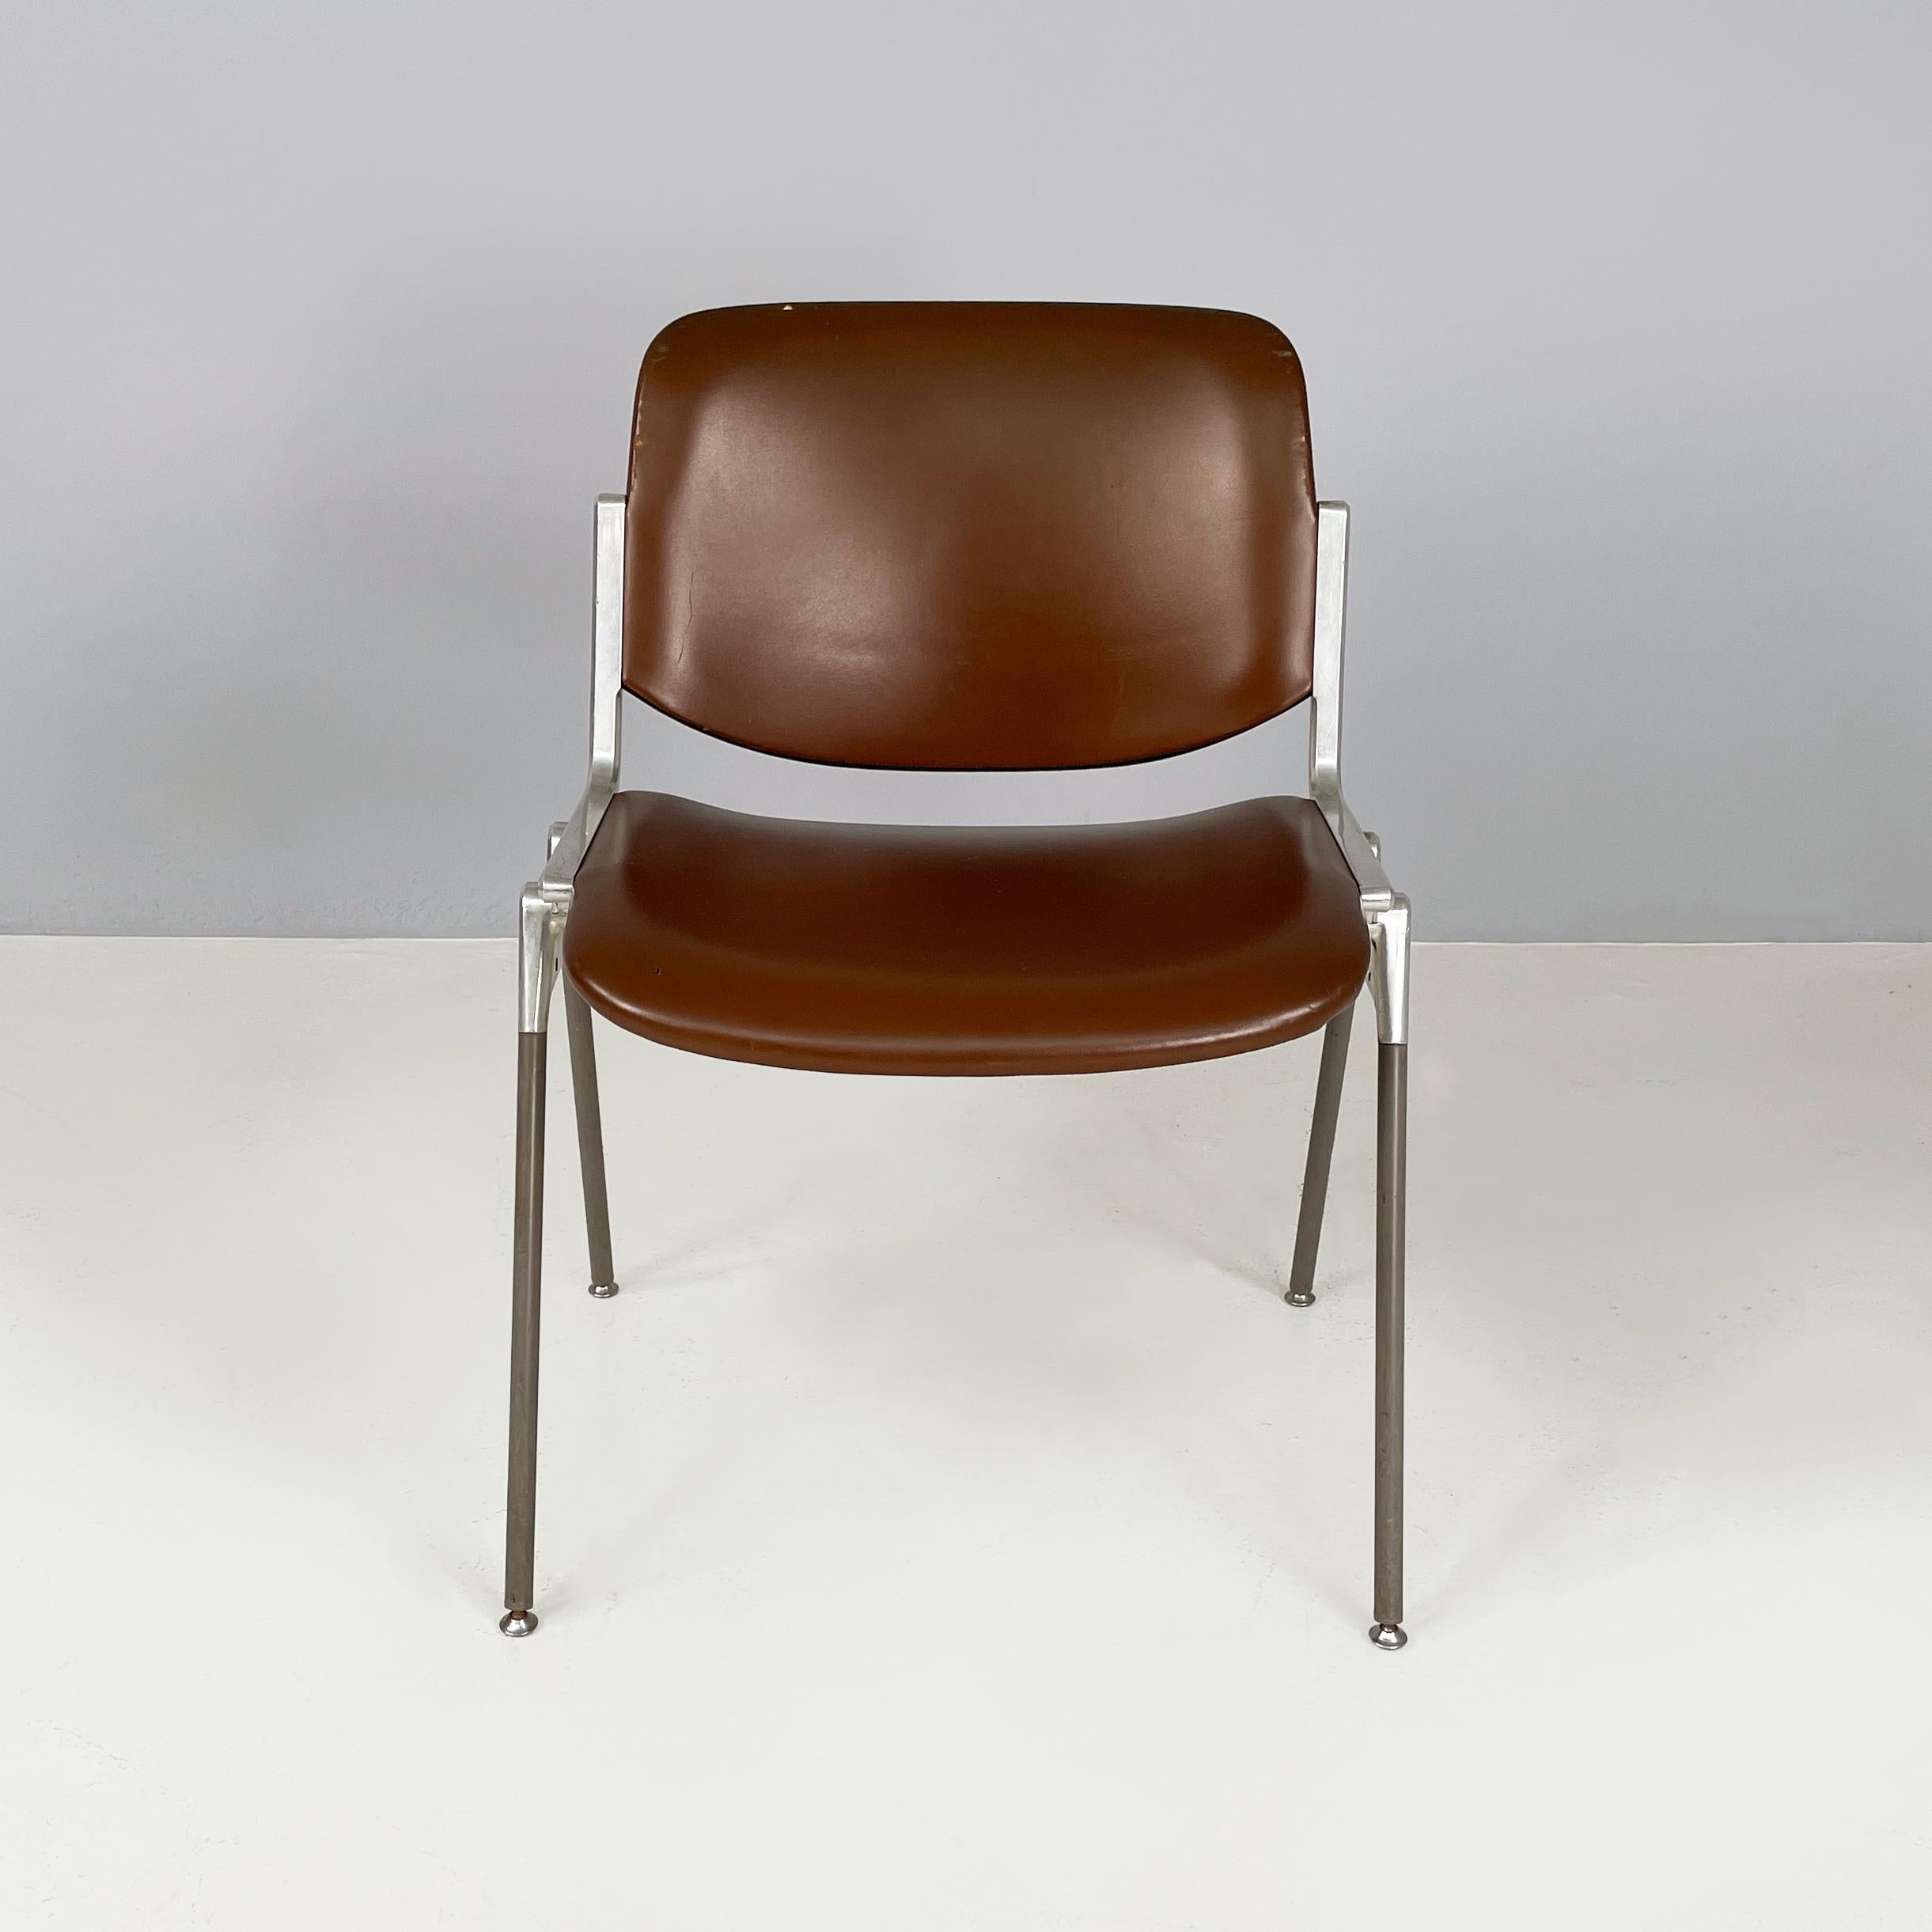 Italian mid-century modern Chair DSC by Giancarlo Piretti for Anonima Castelli, 1970s
Chair mod. DSC padded and covered in dark brown leather. The seat and backrest are rectangular with rounded corners. The sturdy structure is made of aluminum, with